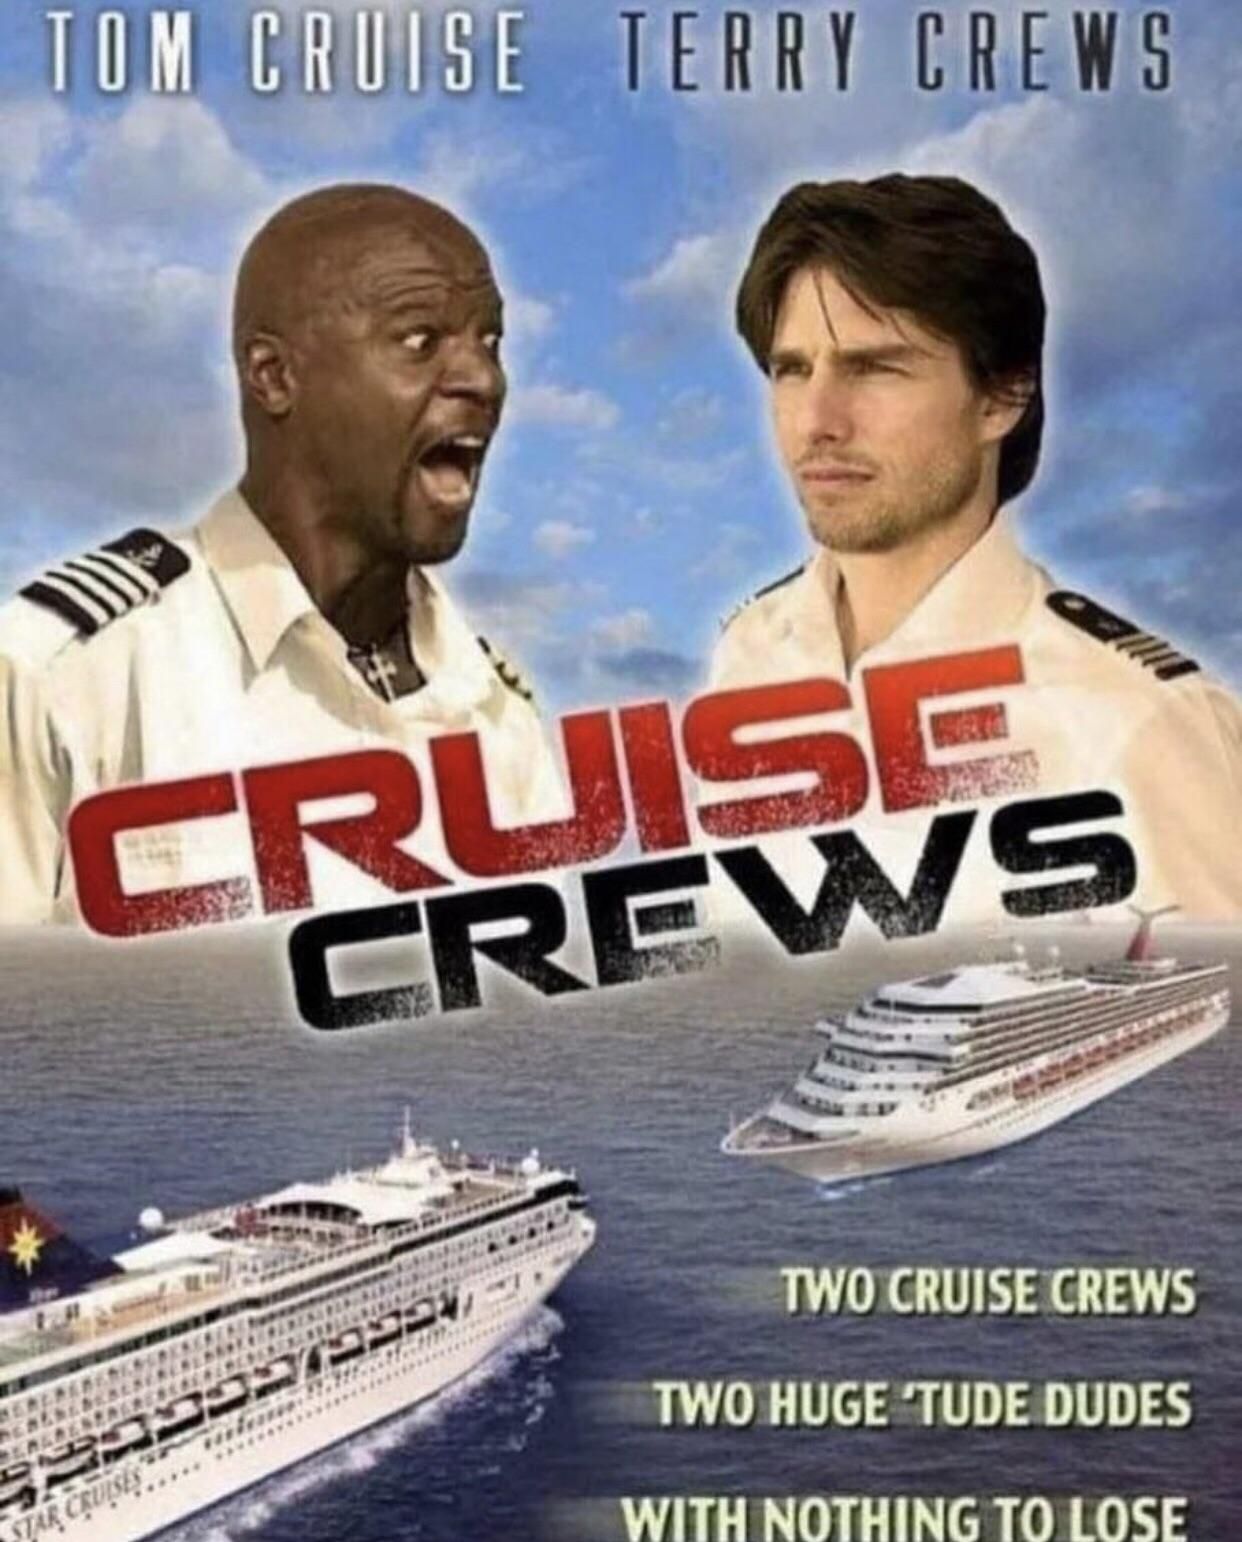 Grab your crews and cruise on down to the theater